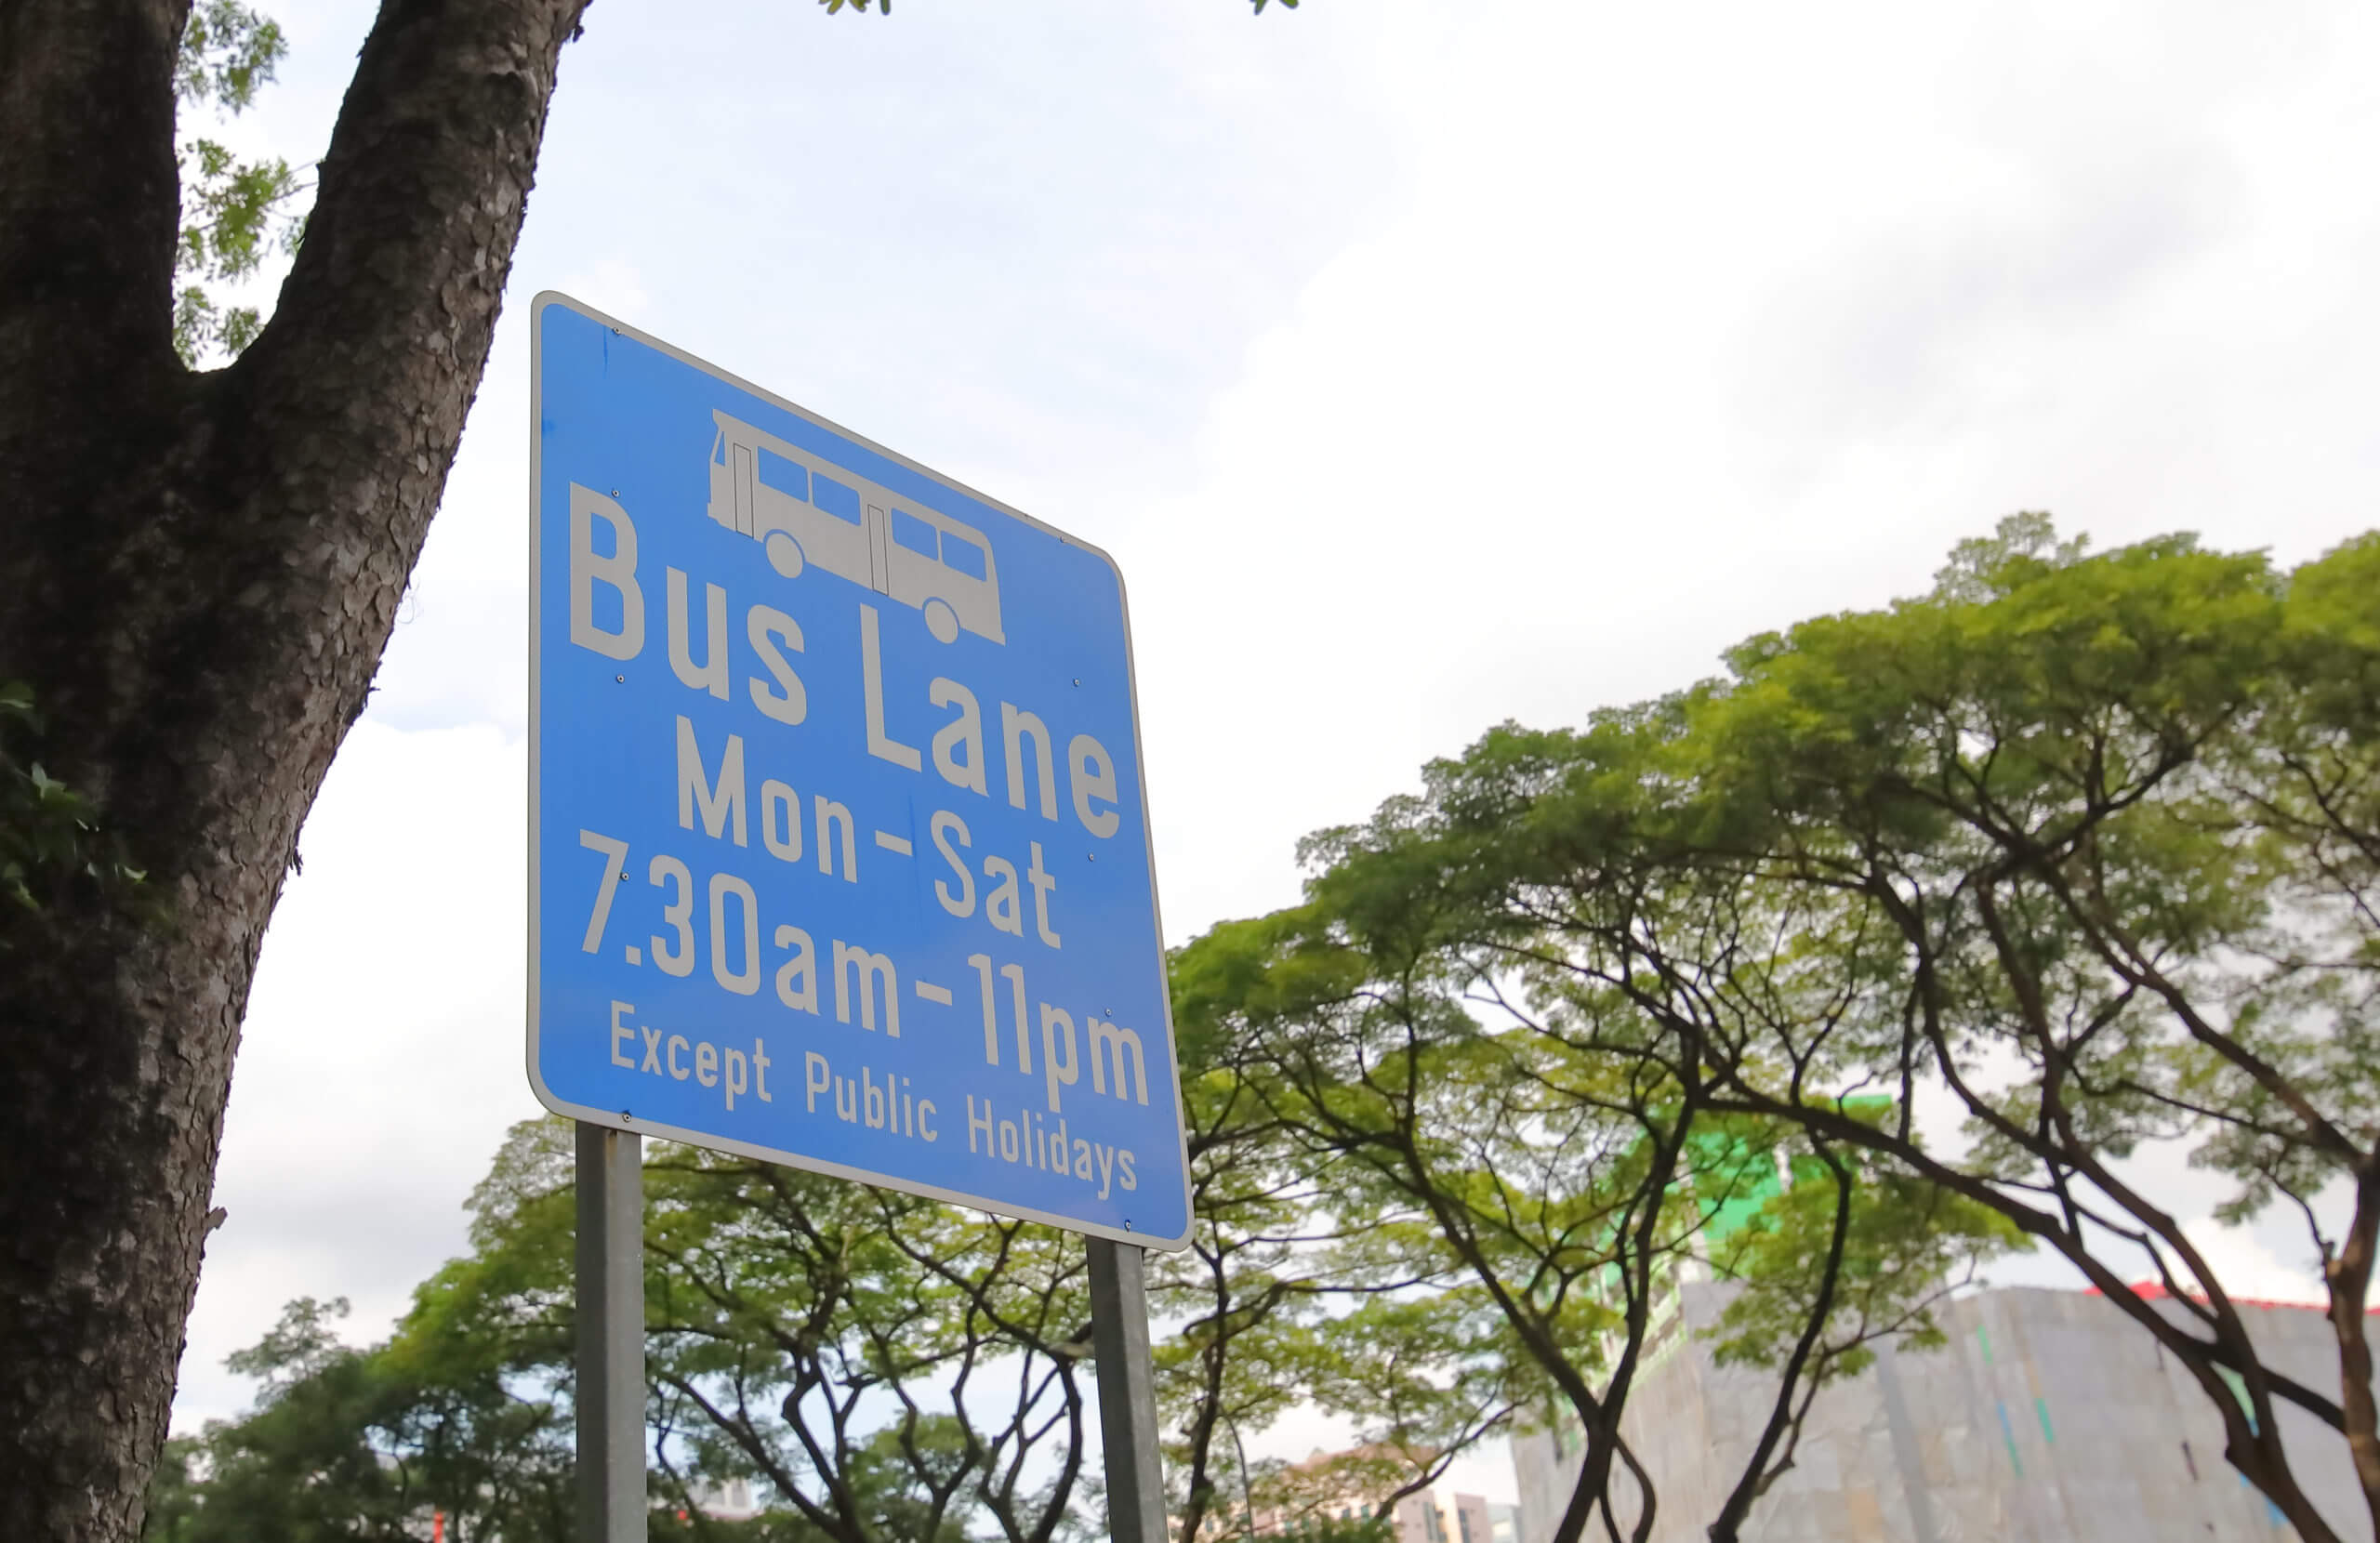 BUS LANE TIMINGS: The definitive guide